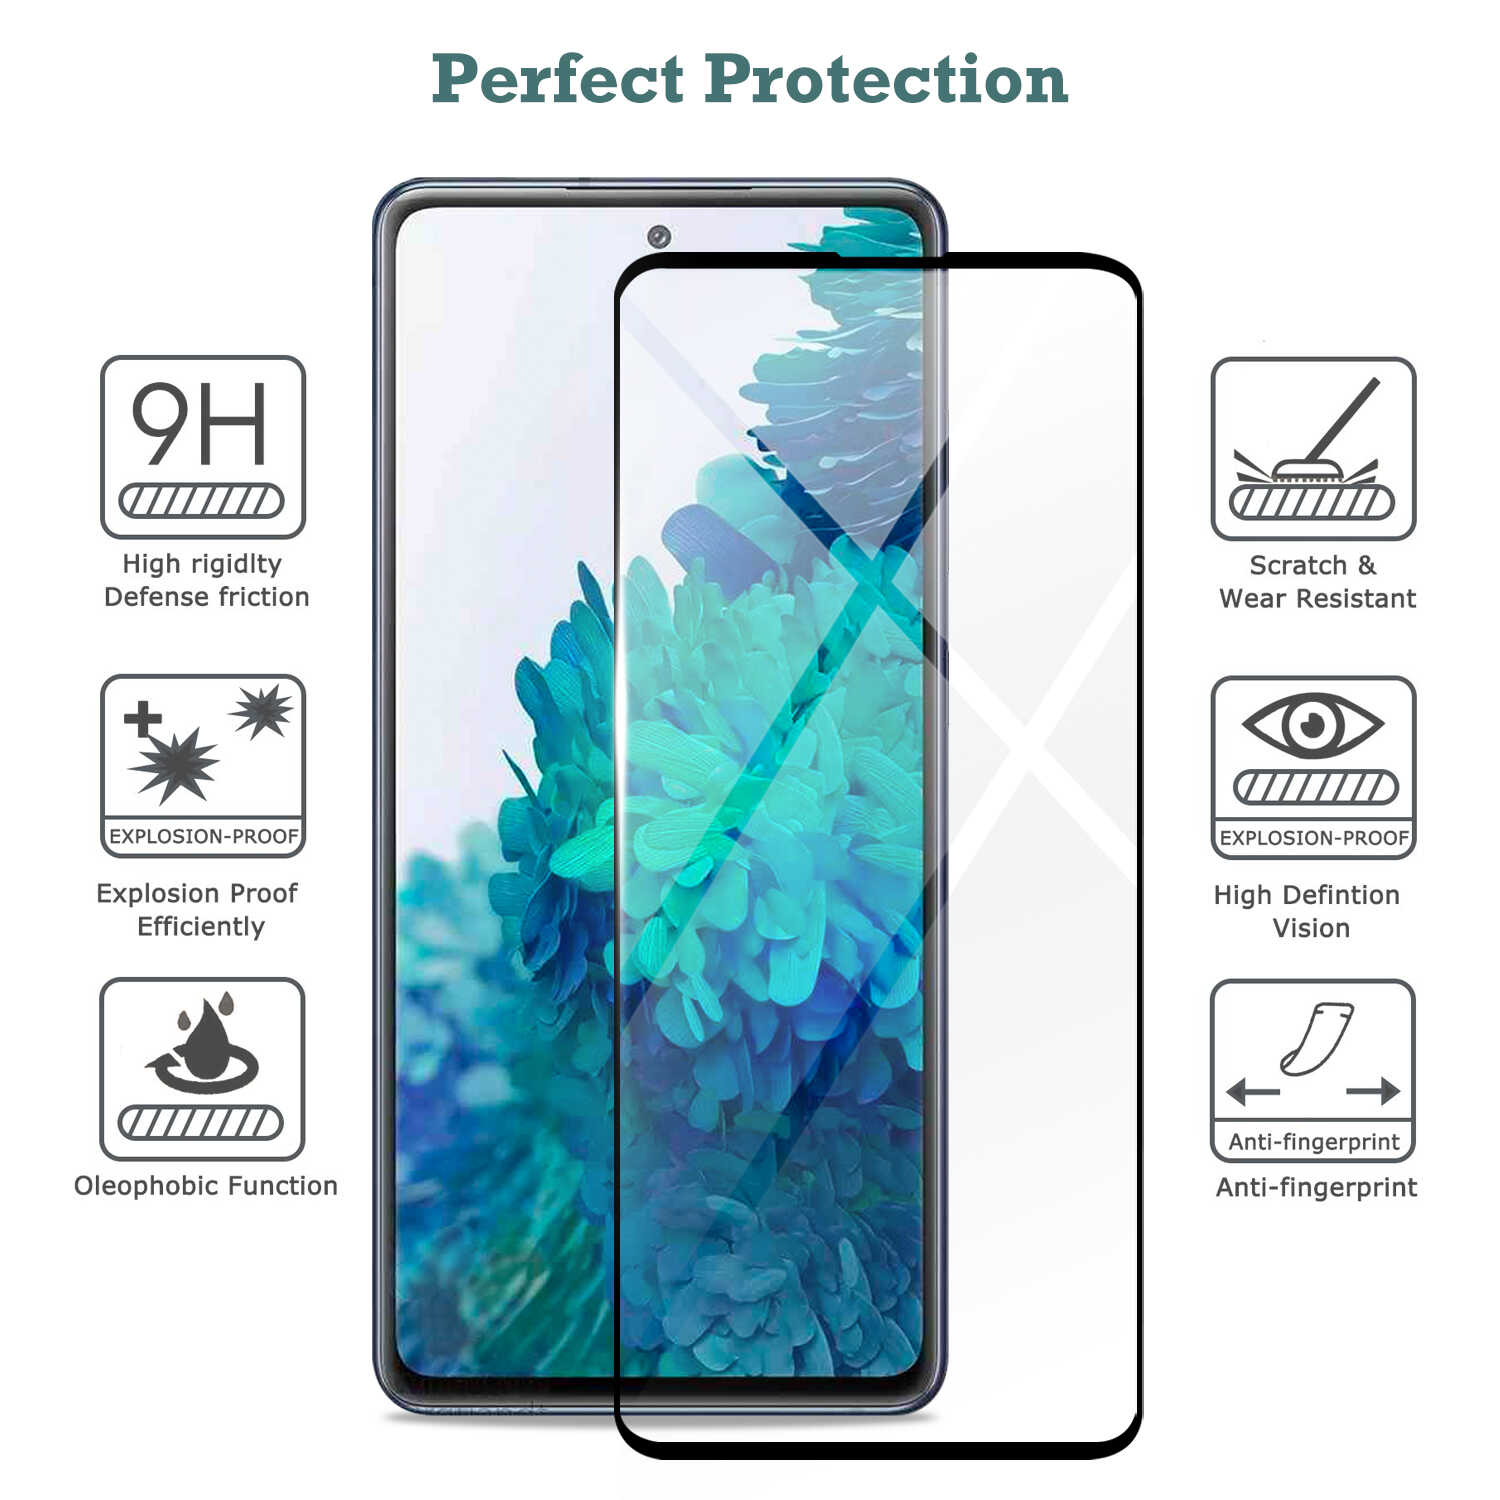 Tough On Samsung Galaxy S20 FE 5G Tempered Glass Screen Protector Black